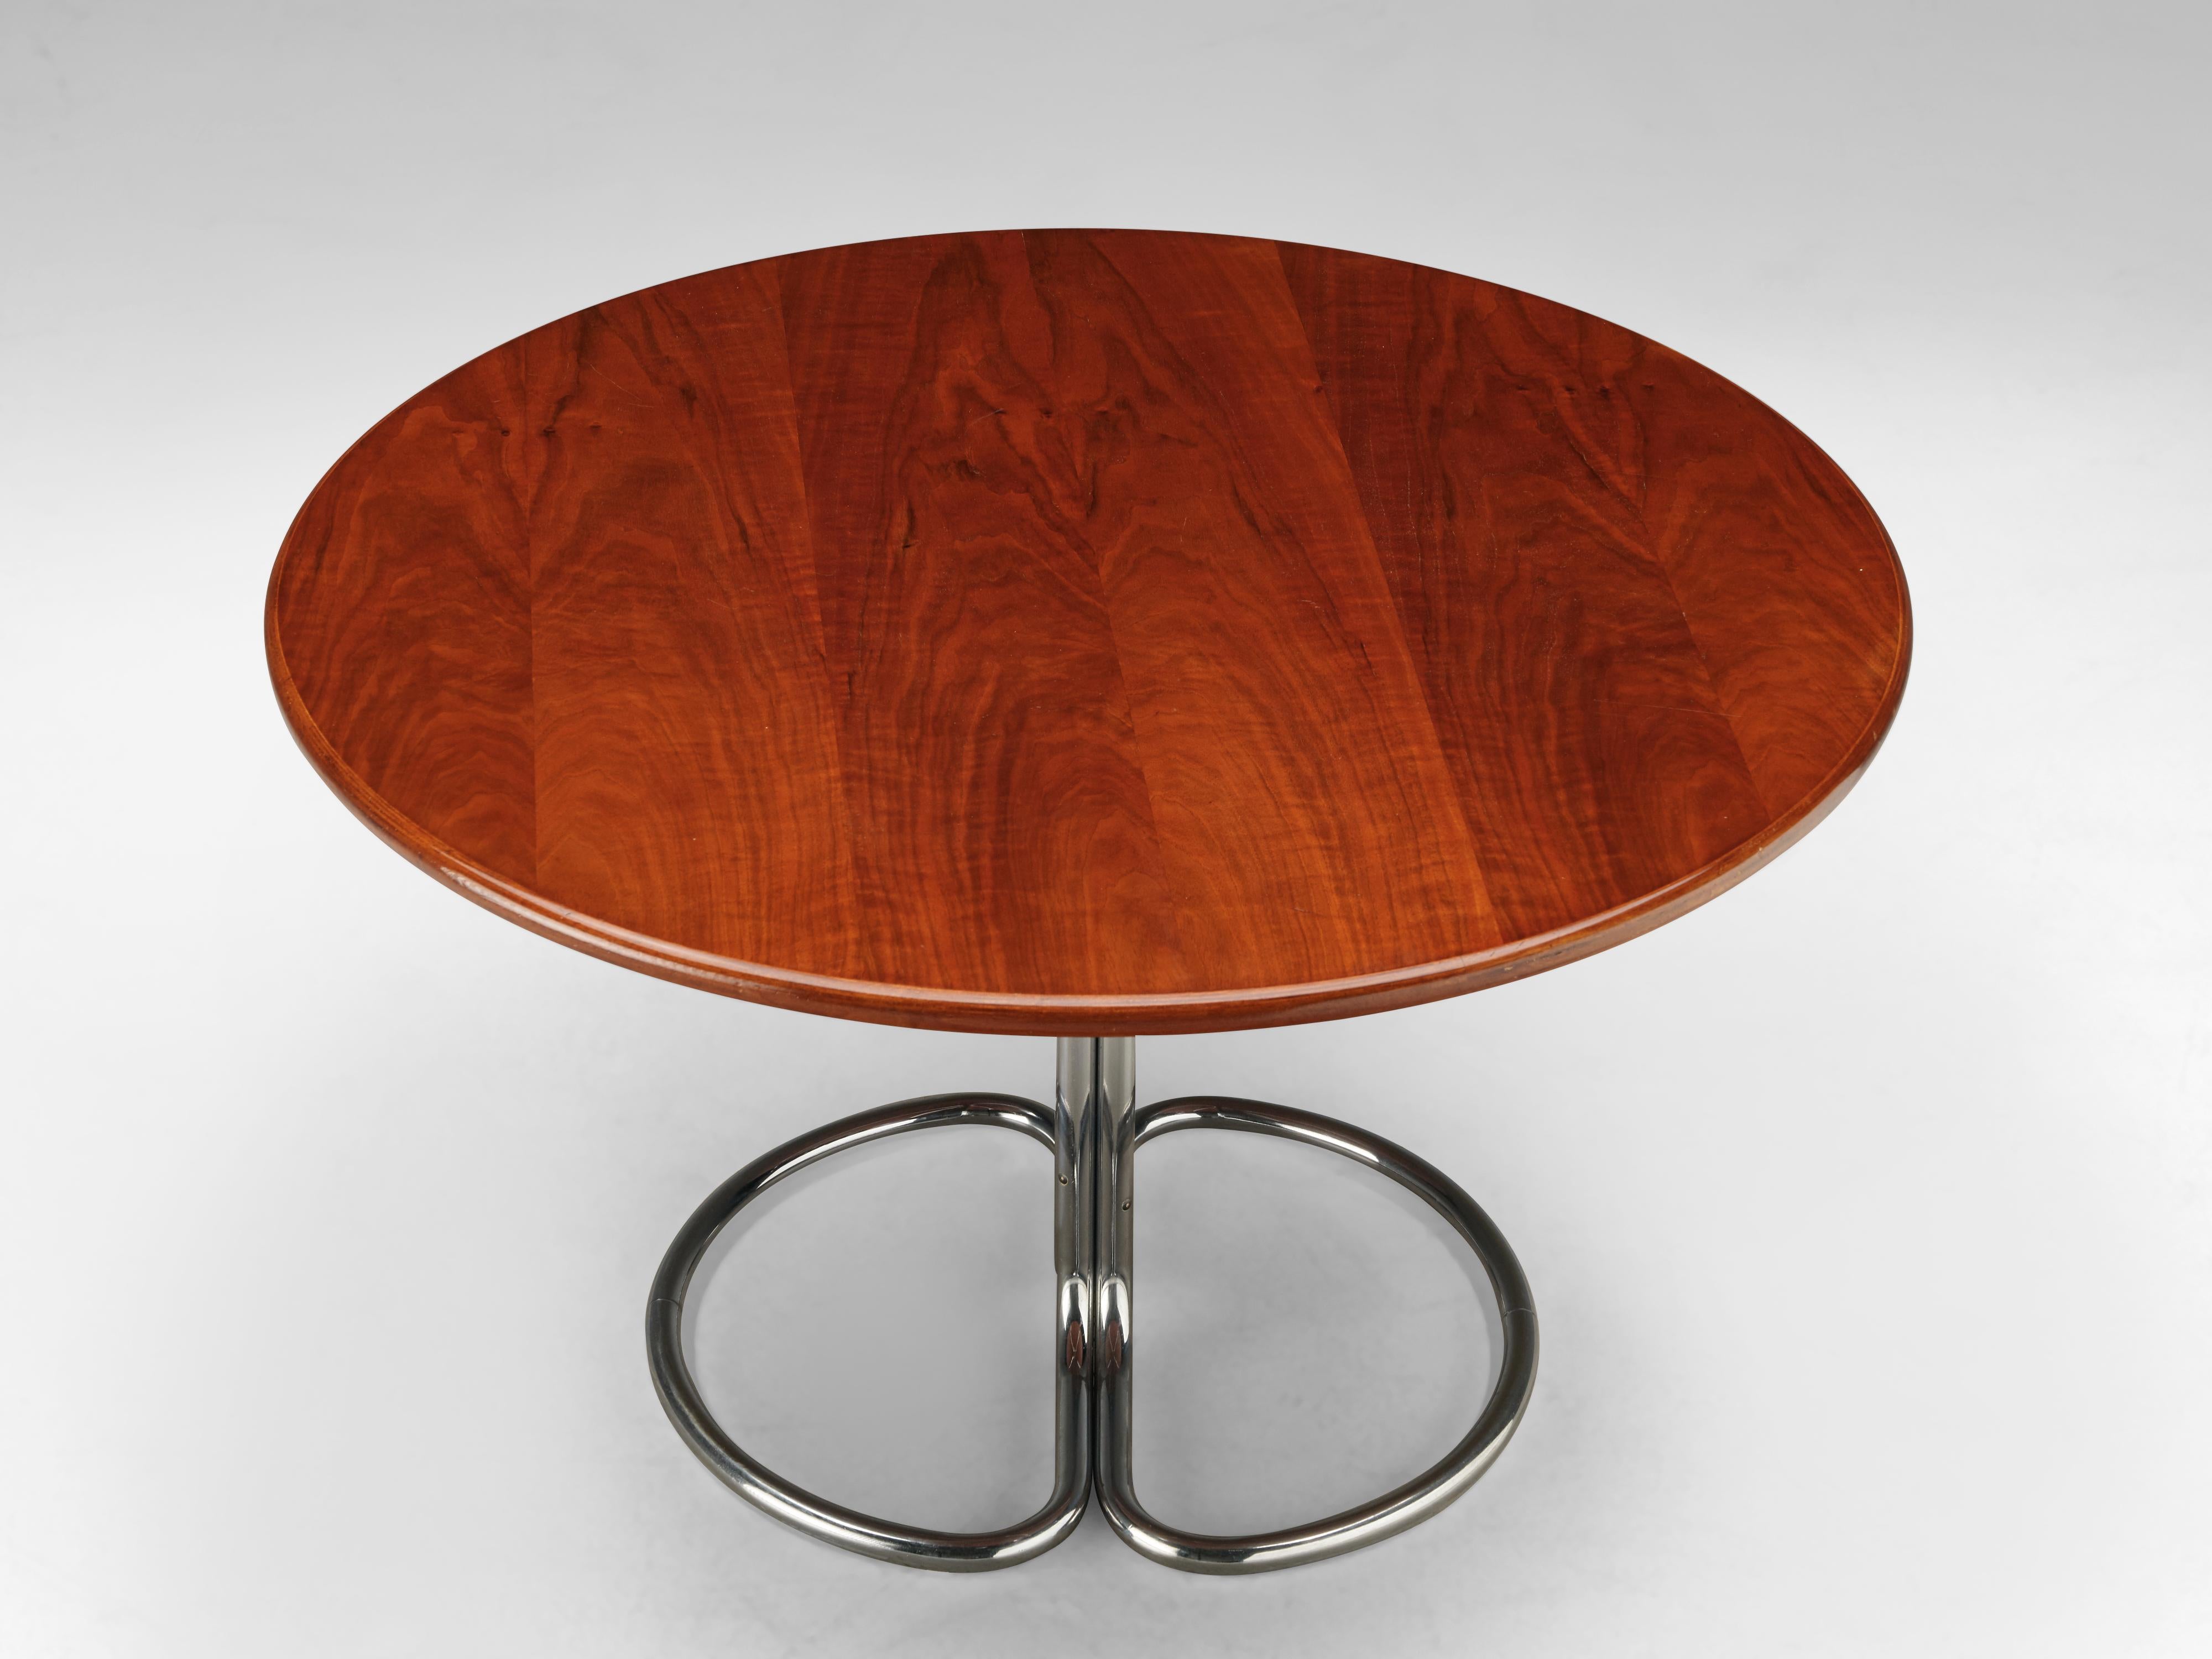 European Giotto Stoppino 'Maia' Table in Walnut with Tapio Wirkkala ‘Nikke’ Dining Chairs For Sale